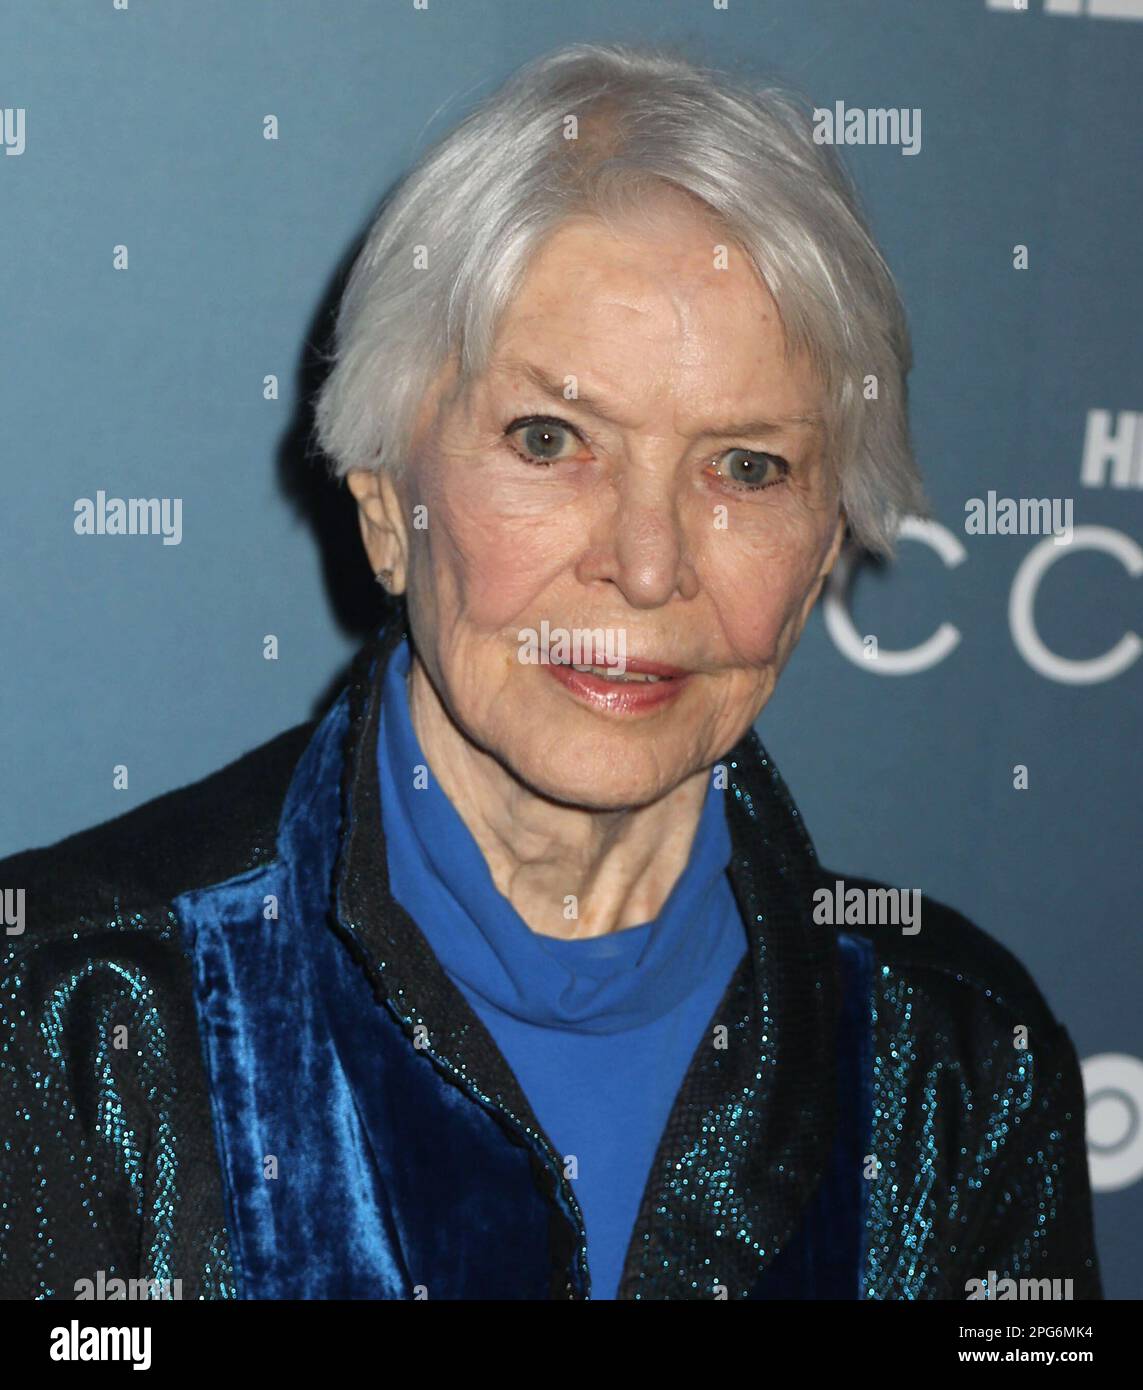 March 20, 2023, New York City, New York, USA: Actor ELLEN BURSTYN seen at  the red carpet arrivals for Season 4 of HBOâ€™s â€˜Successionâ€™ held at  Jazz at Lincoln Center. (Credit Image: ©